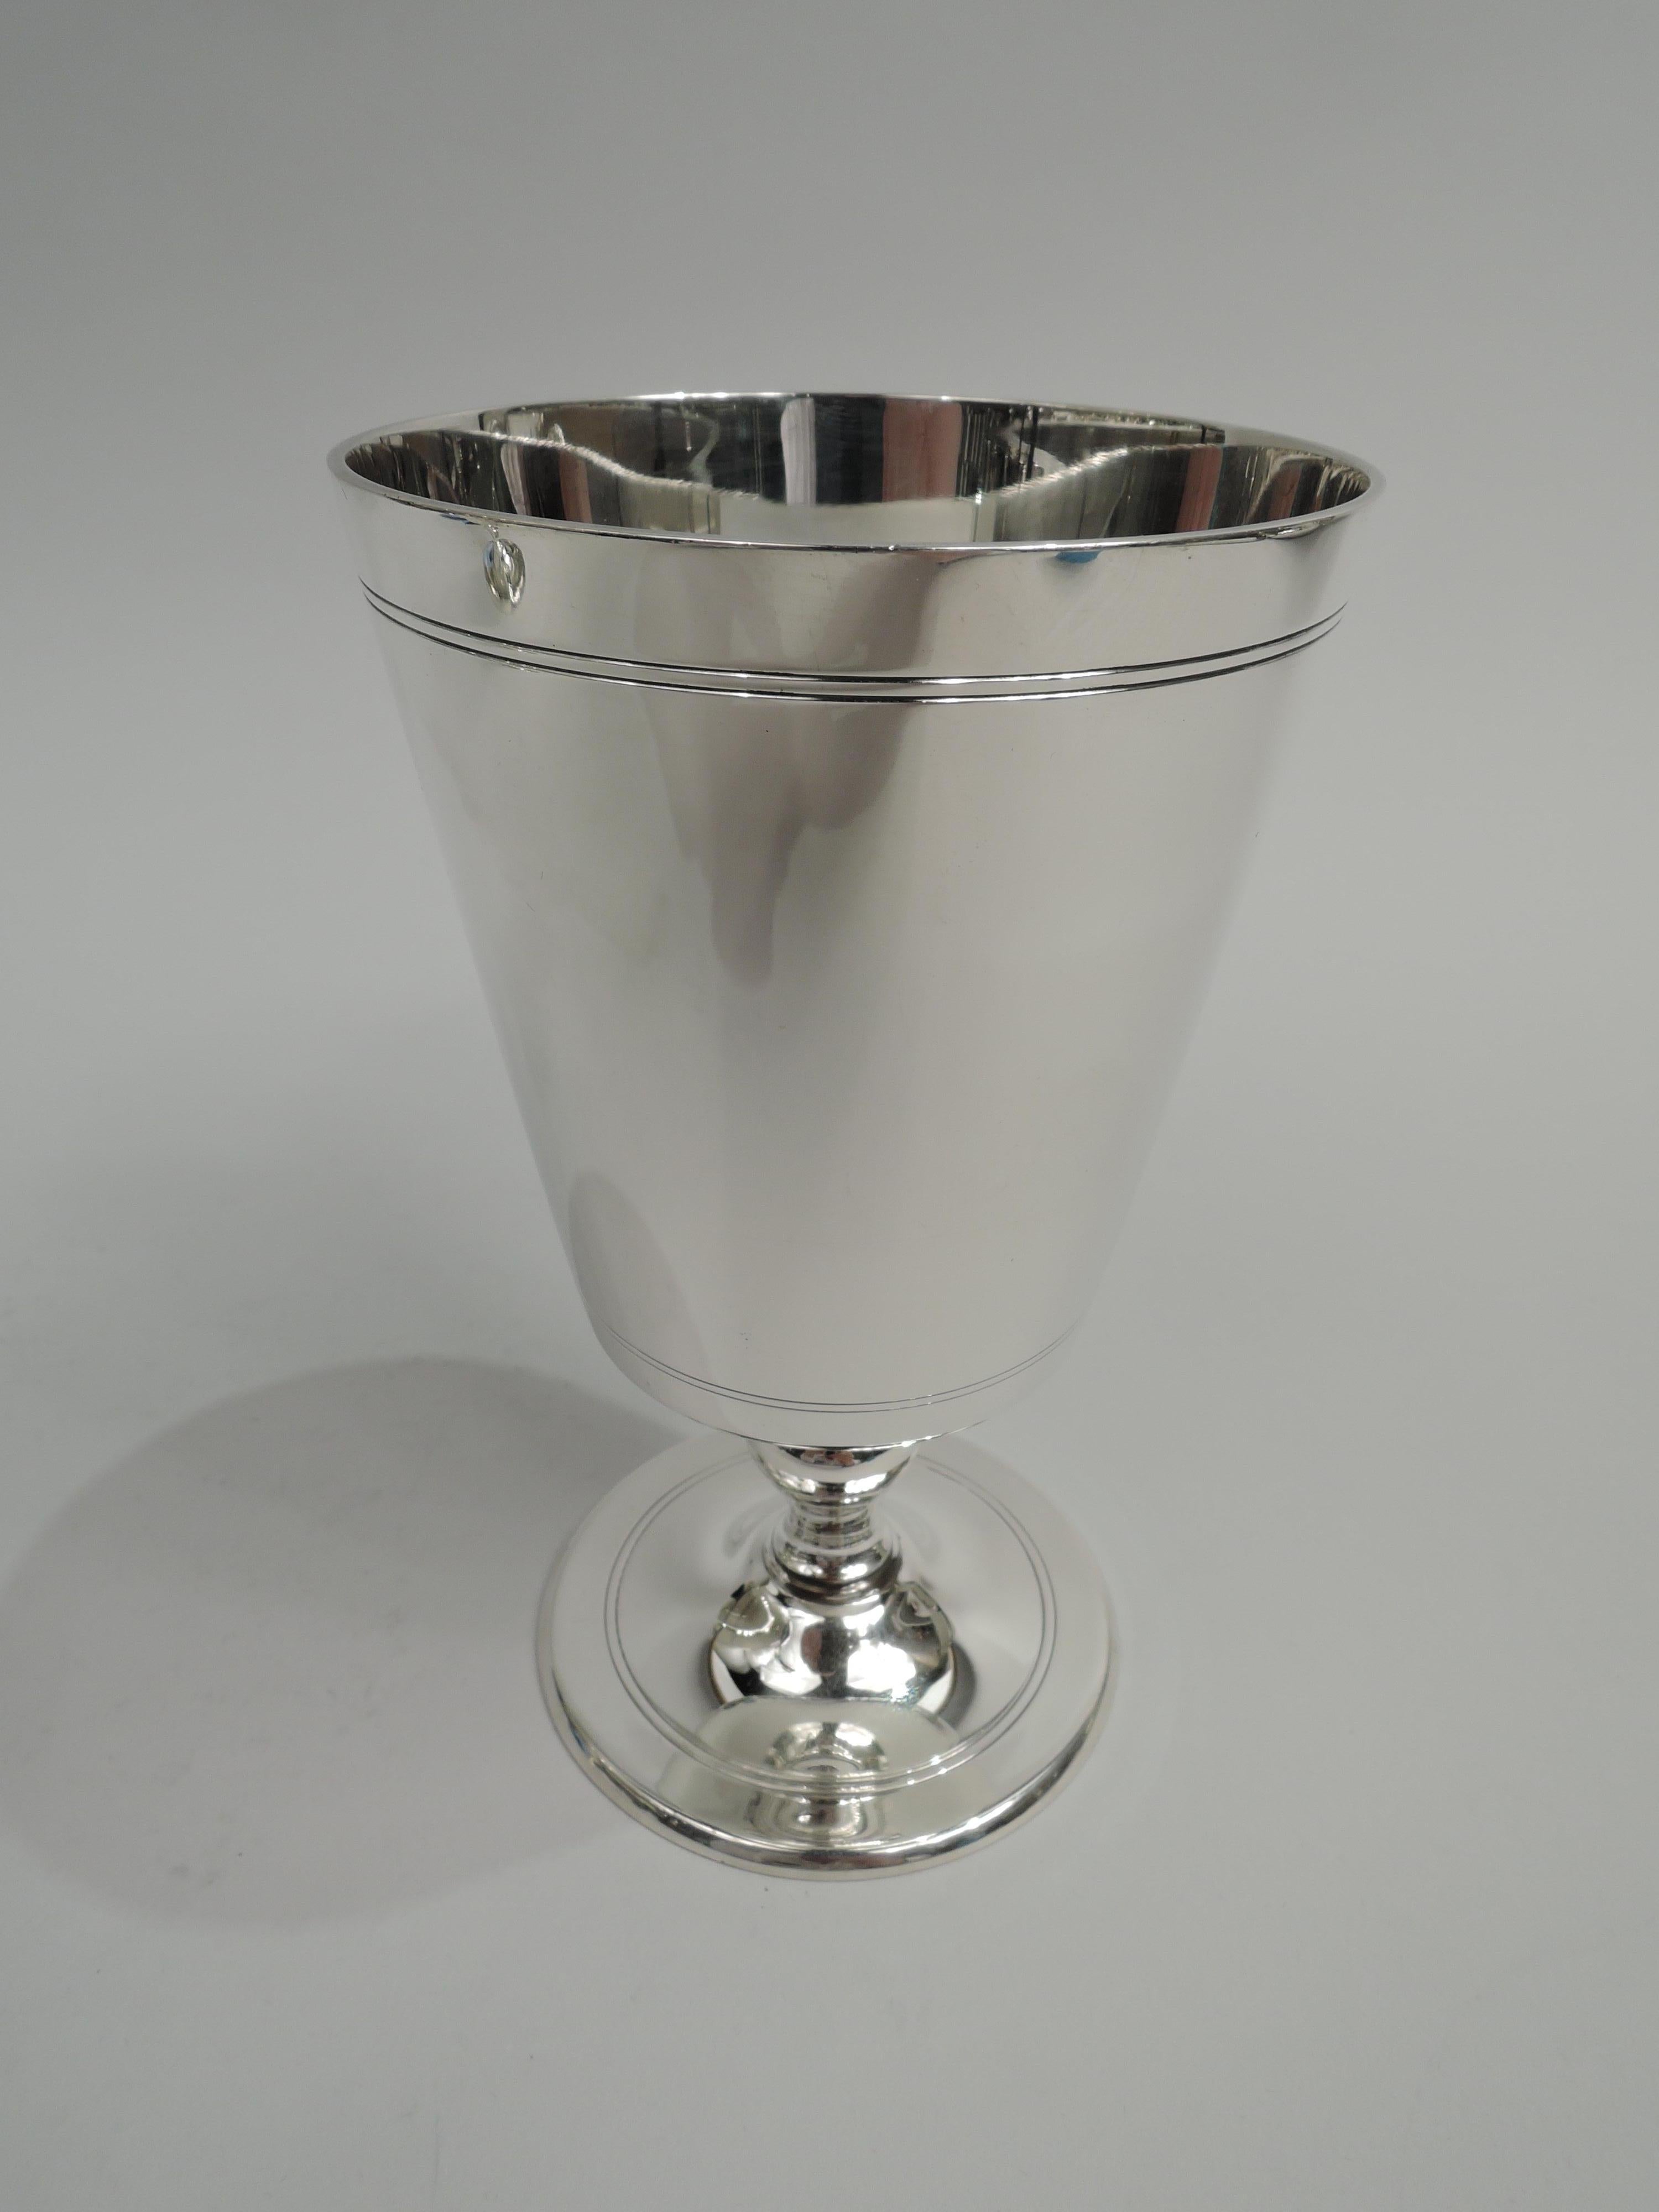 Pair of Art Deco sterling silver goblets. Made by Tiffany & Co. in New York, ca 1923. Each: Straight and tapering bowl with curved bottom, baluter support, and gently raised foot. Spare Modern form with incised bands. Perfect for twosome tippling.